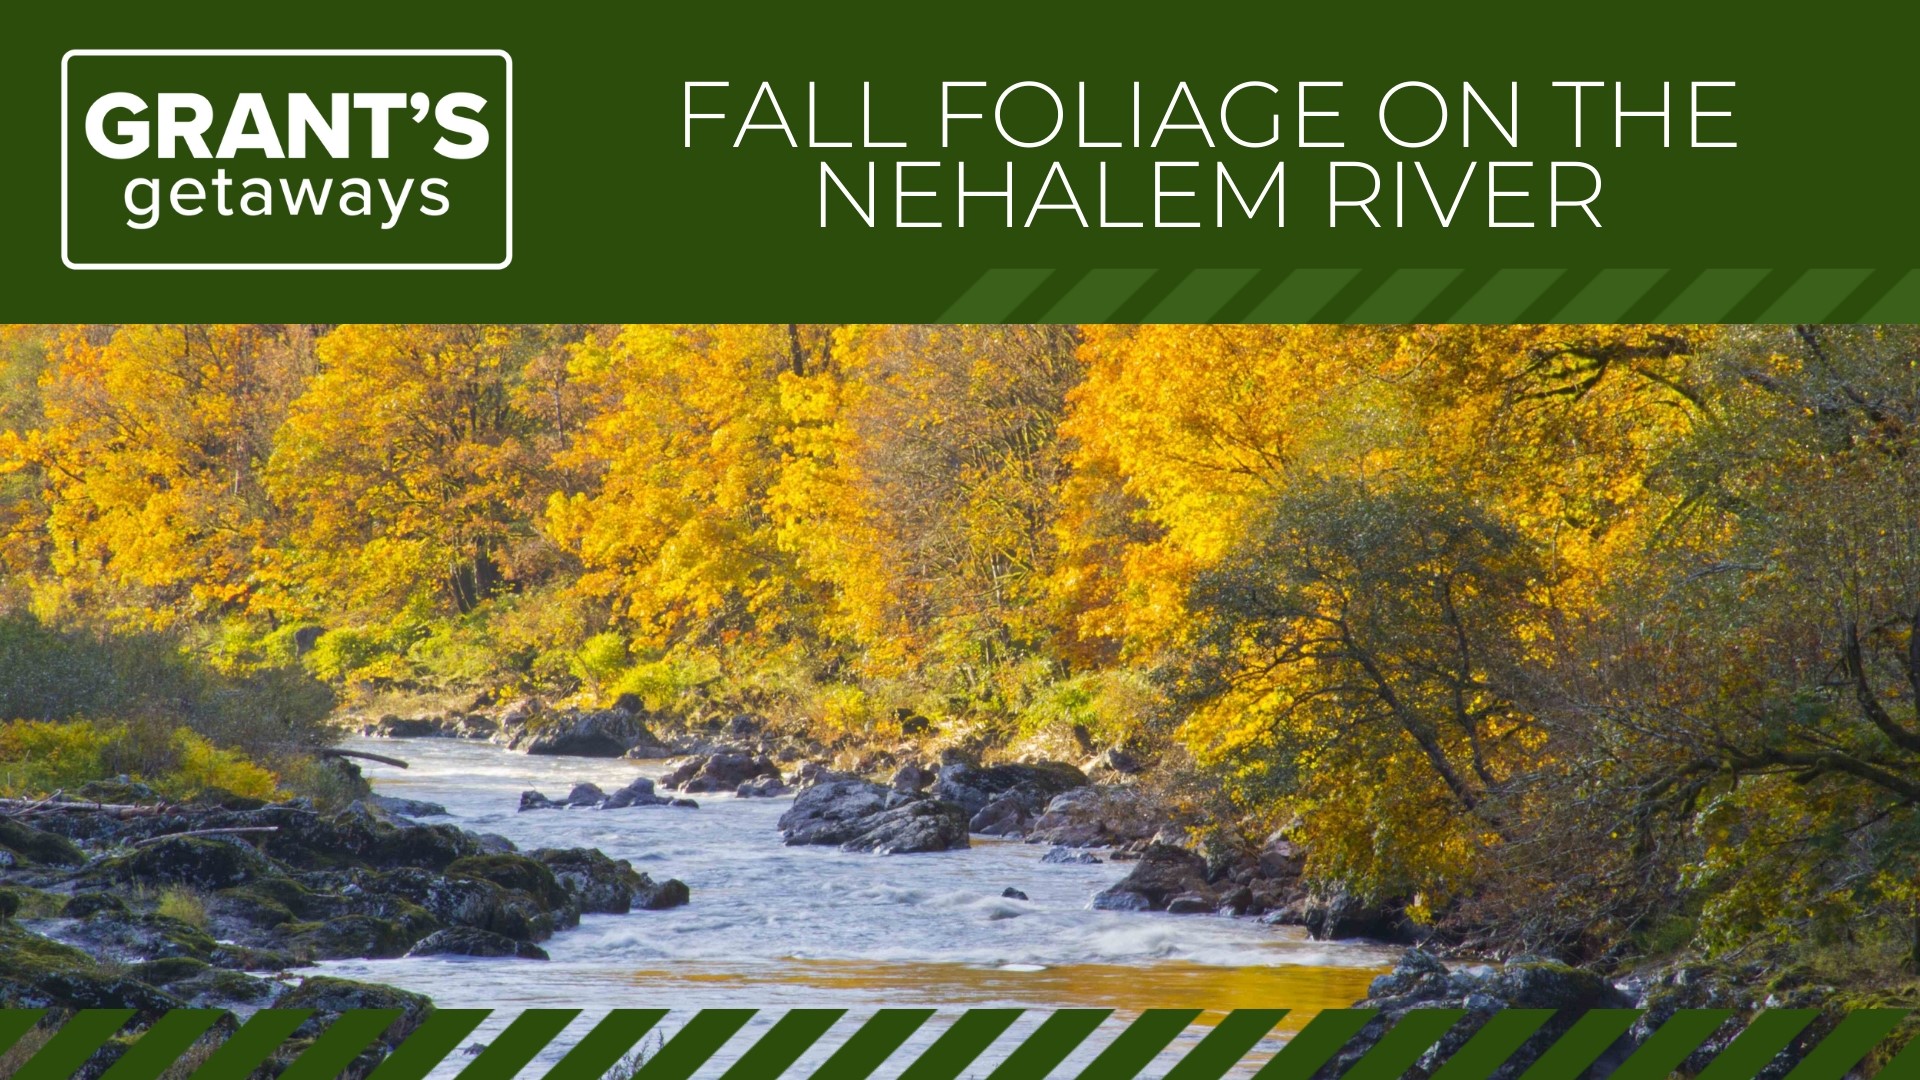 A scenic 30-mile drive along the river takes you through some of Oregon's most splendid sights of the fall season.